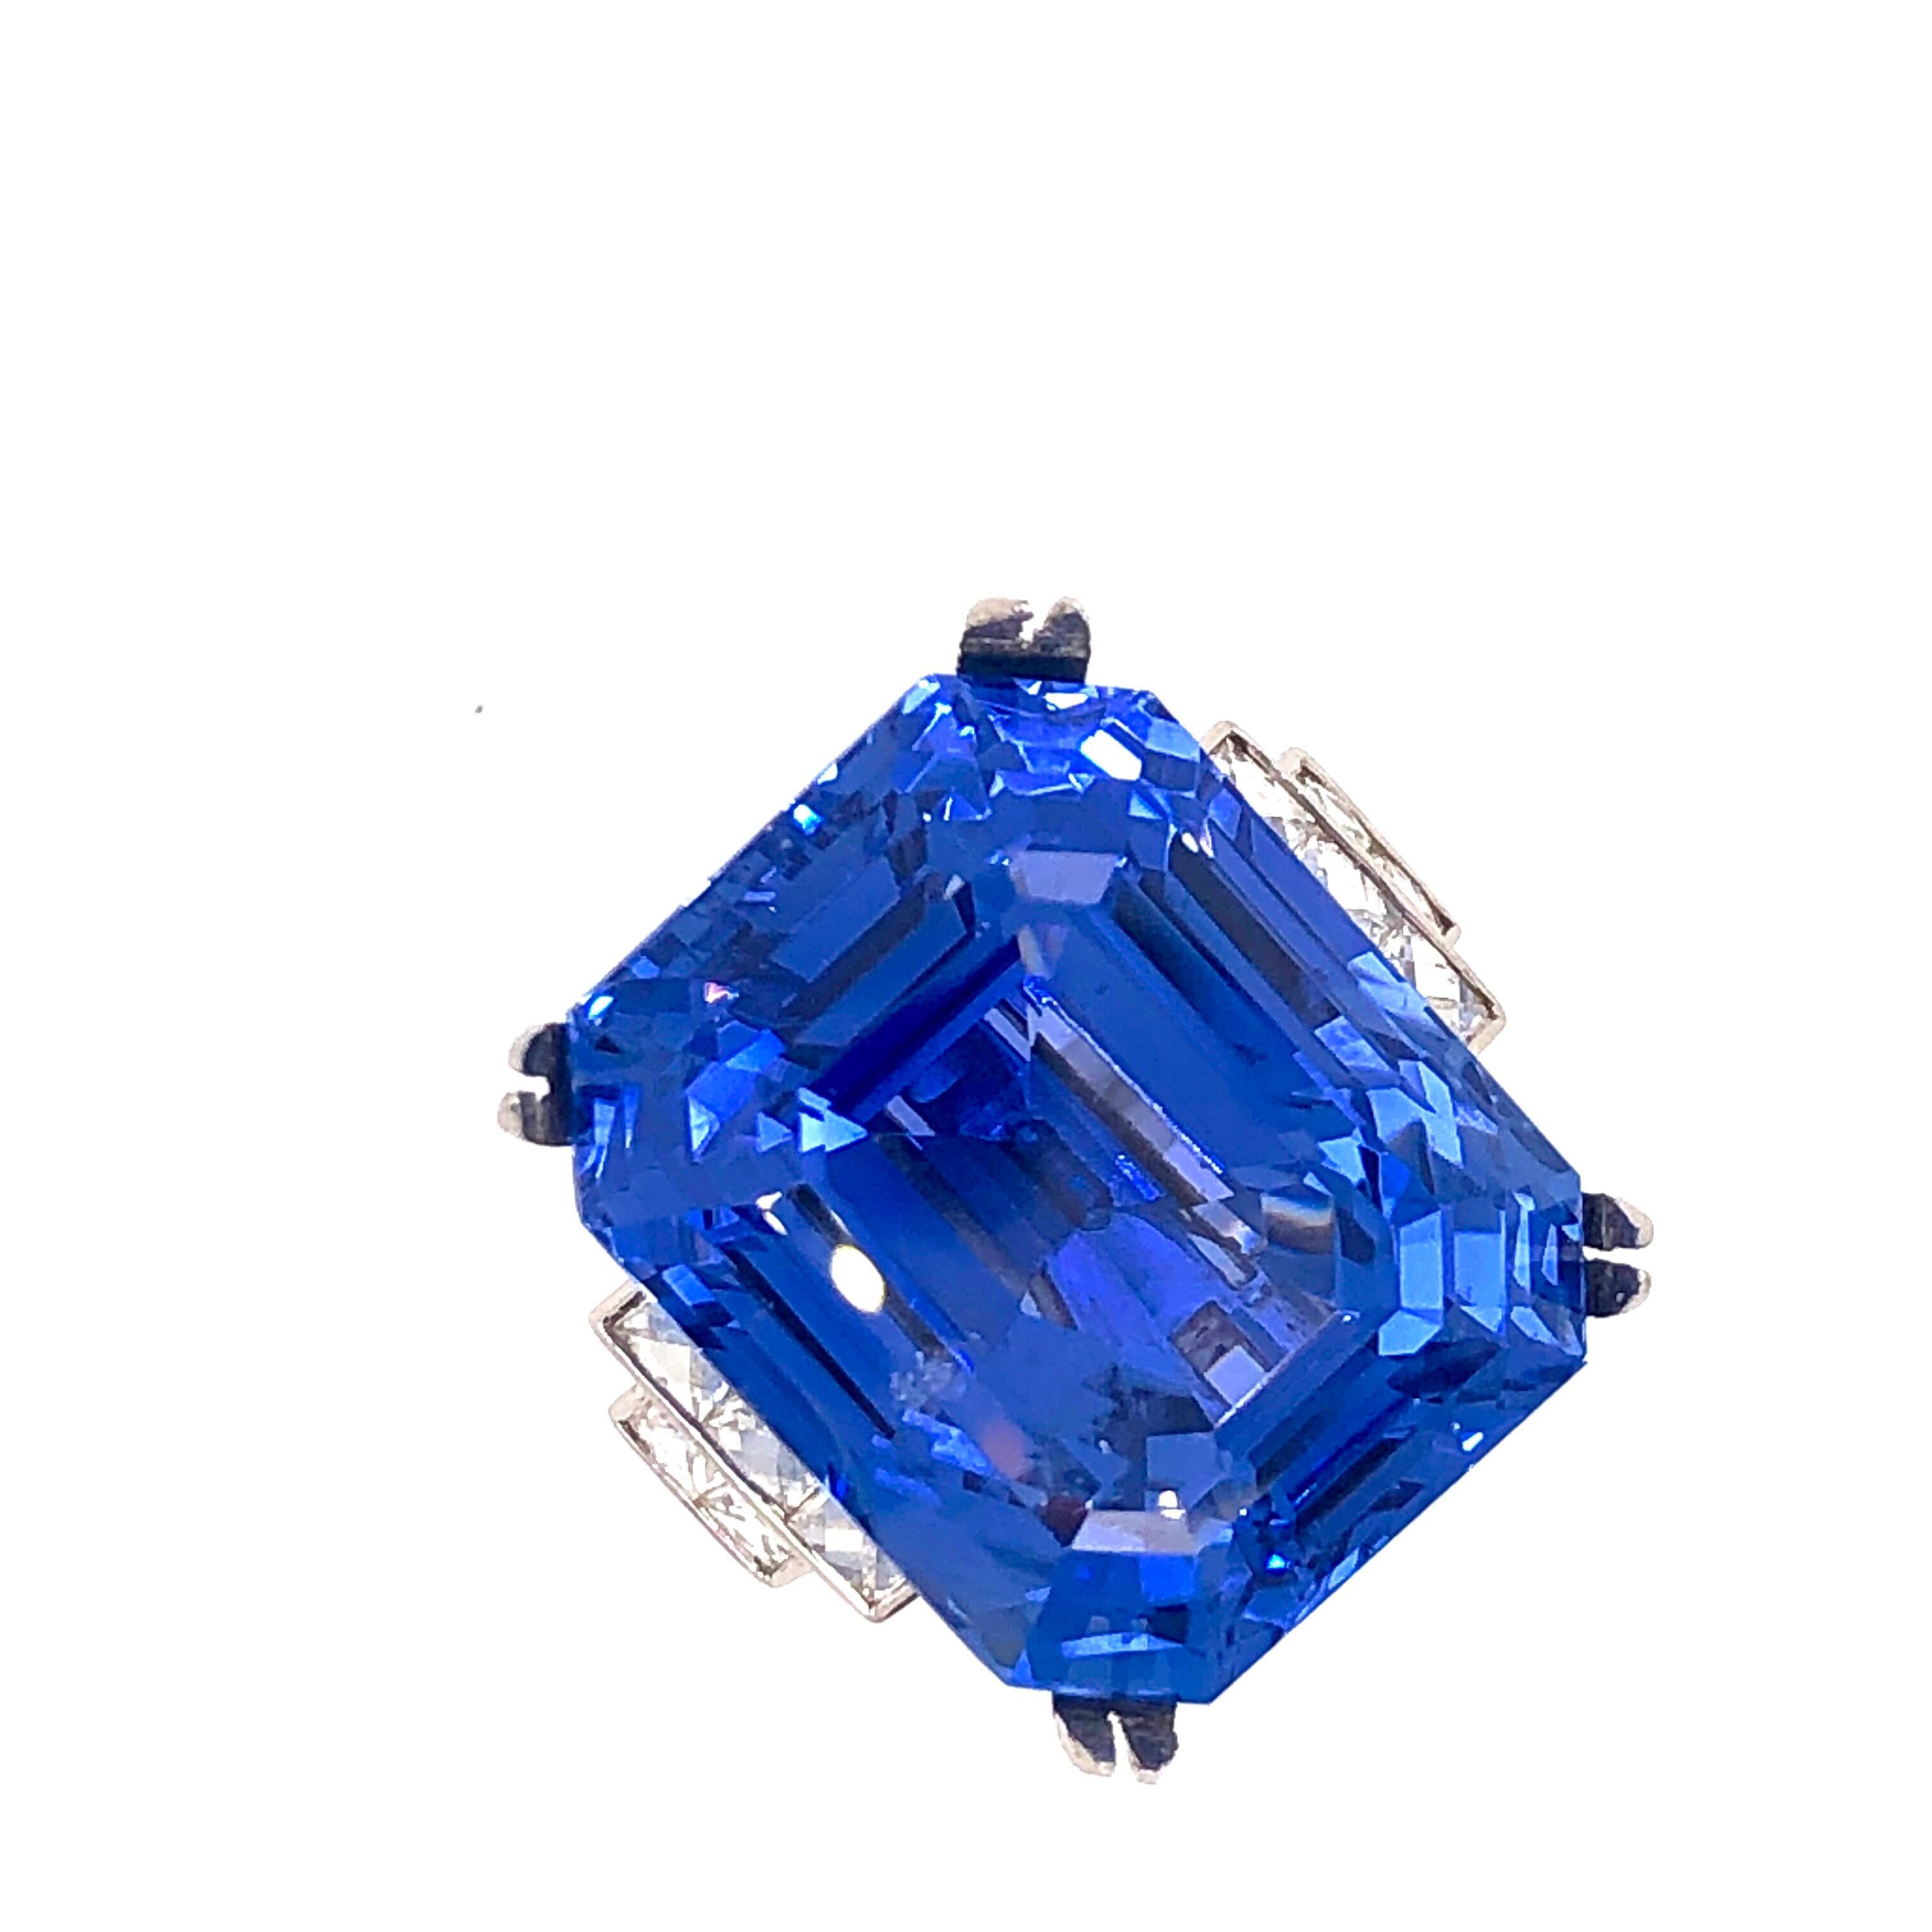 Created by Emilio Jewelry this ring is an excellent investment! Showcasing an Emerald Cut Ceylon Sapphire weighing 43.02 carats, and certified by Gubelin and GIA as an untreated, UNHEATED Sri Lankan Ceylon Sapphire. You will notice very few